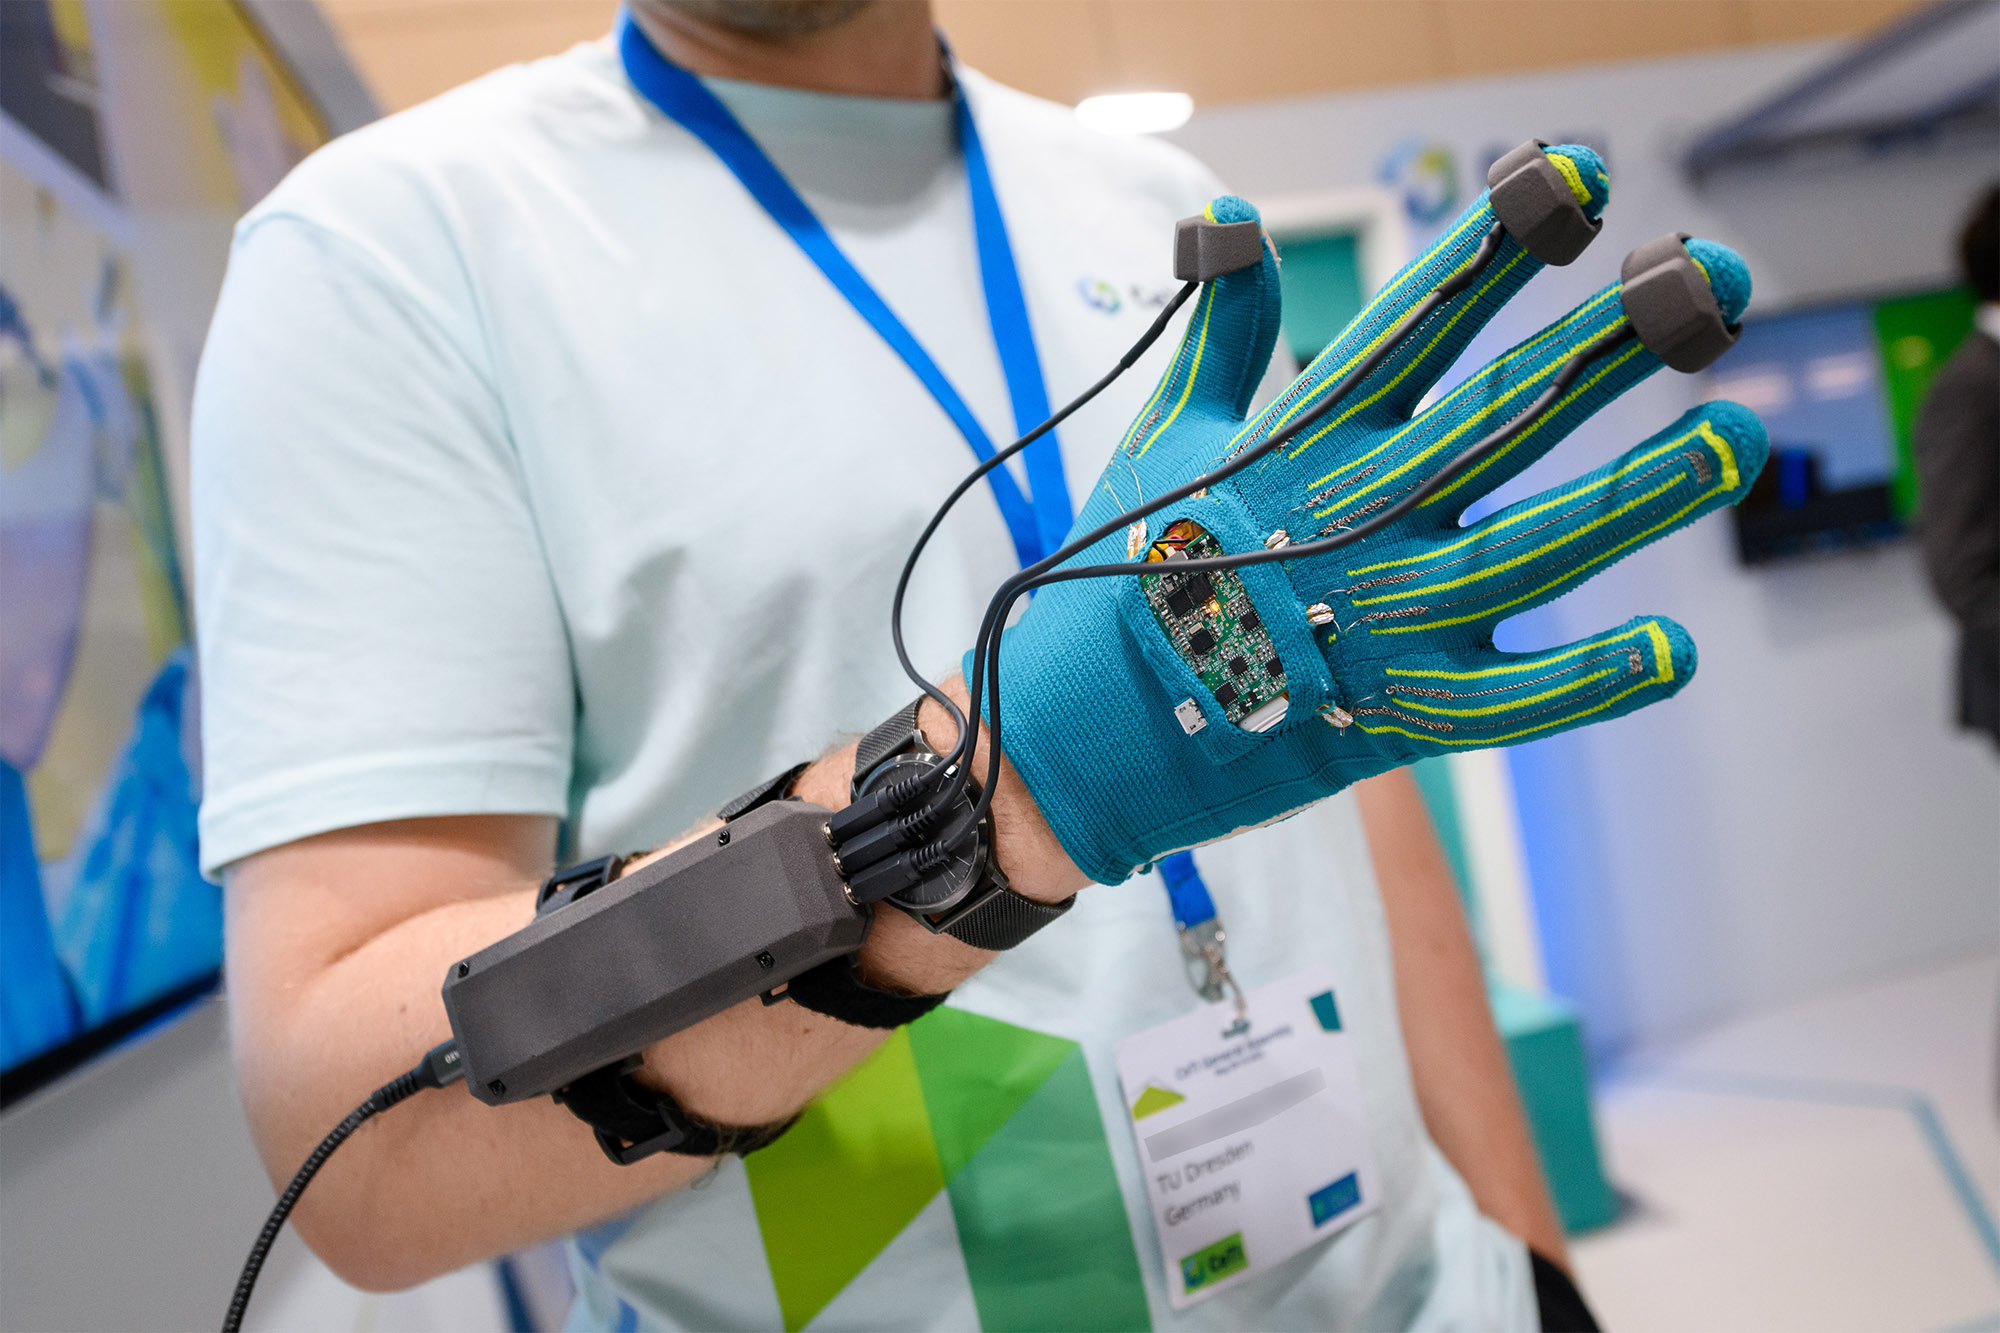 A person wearing a smart glove with sensors attached to the arm